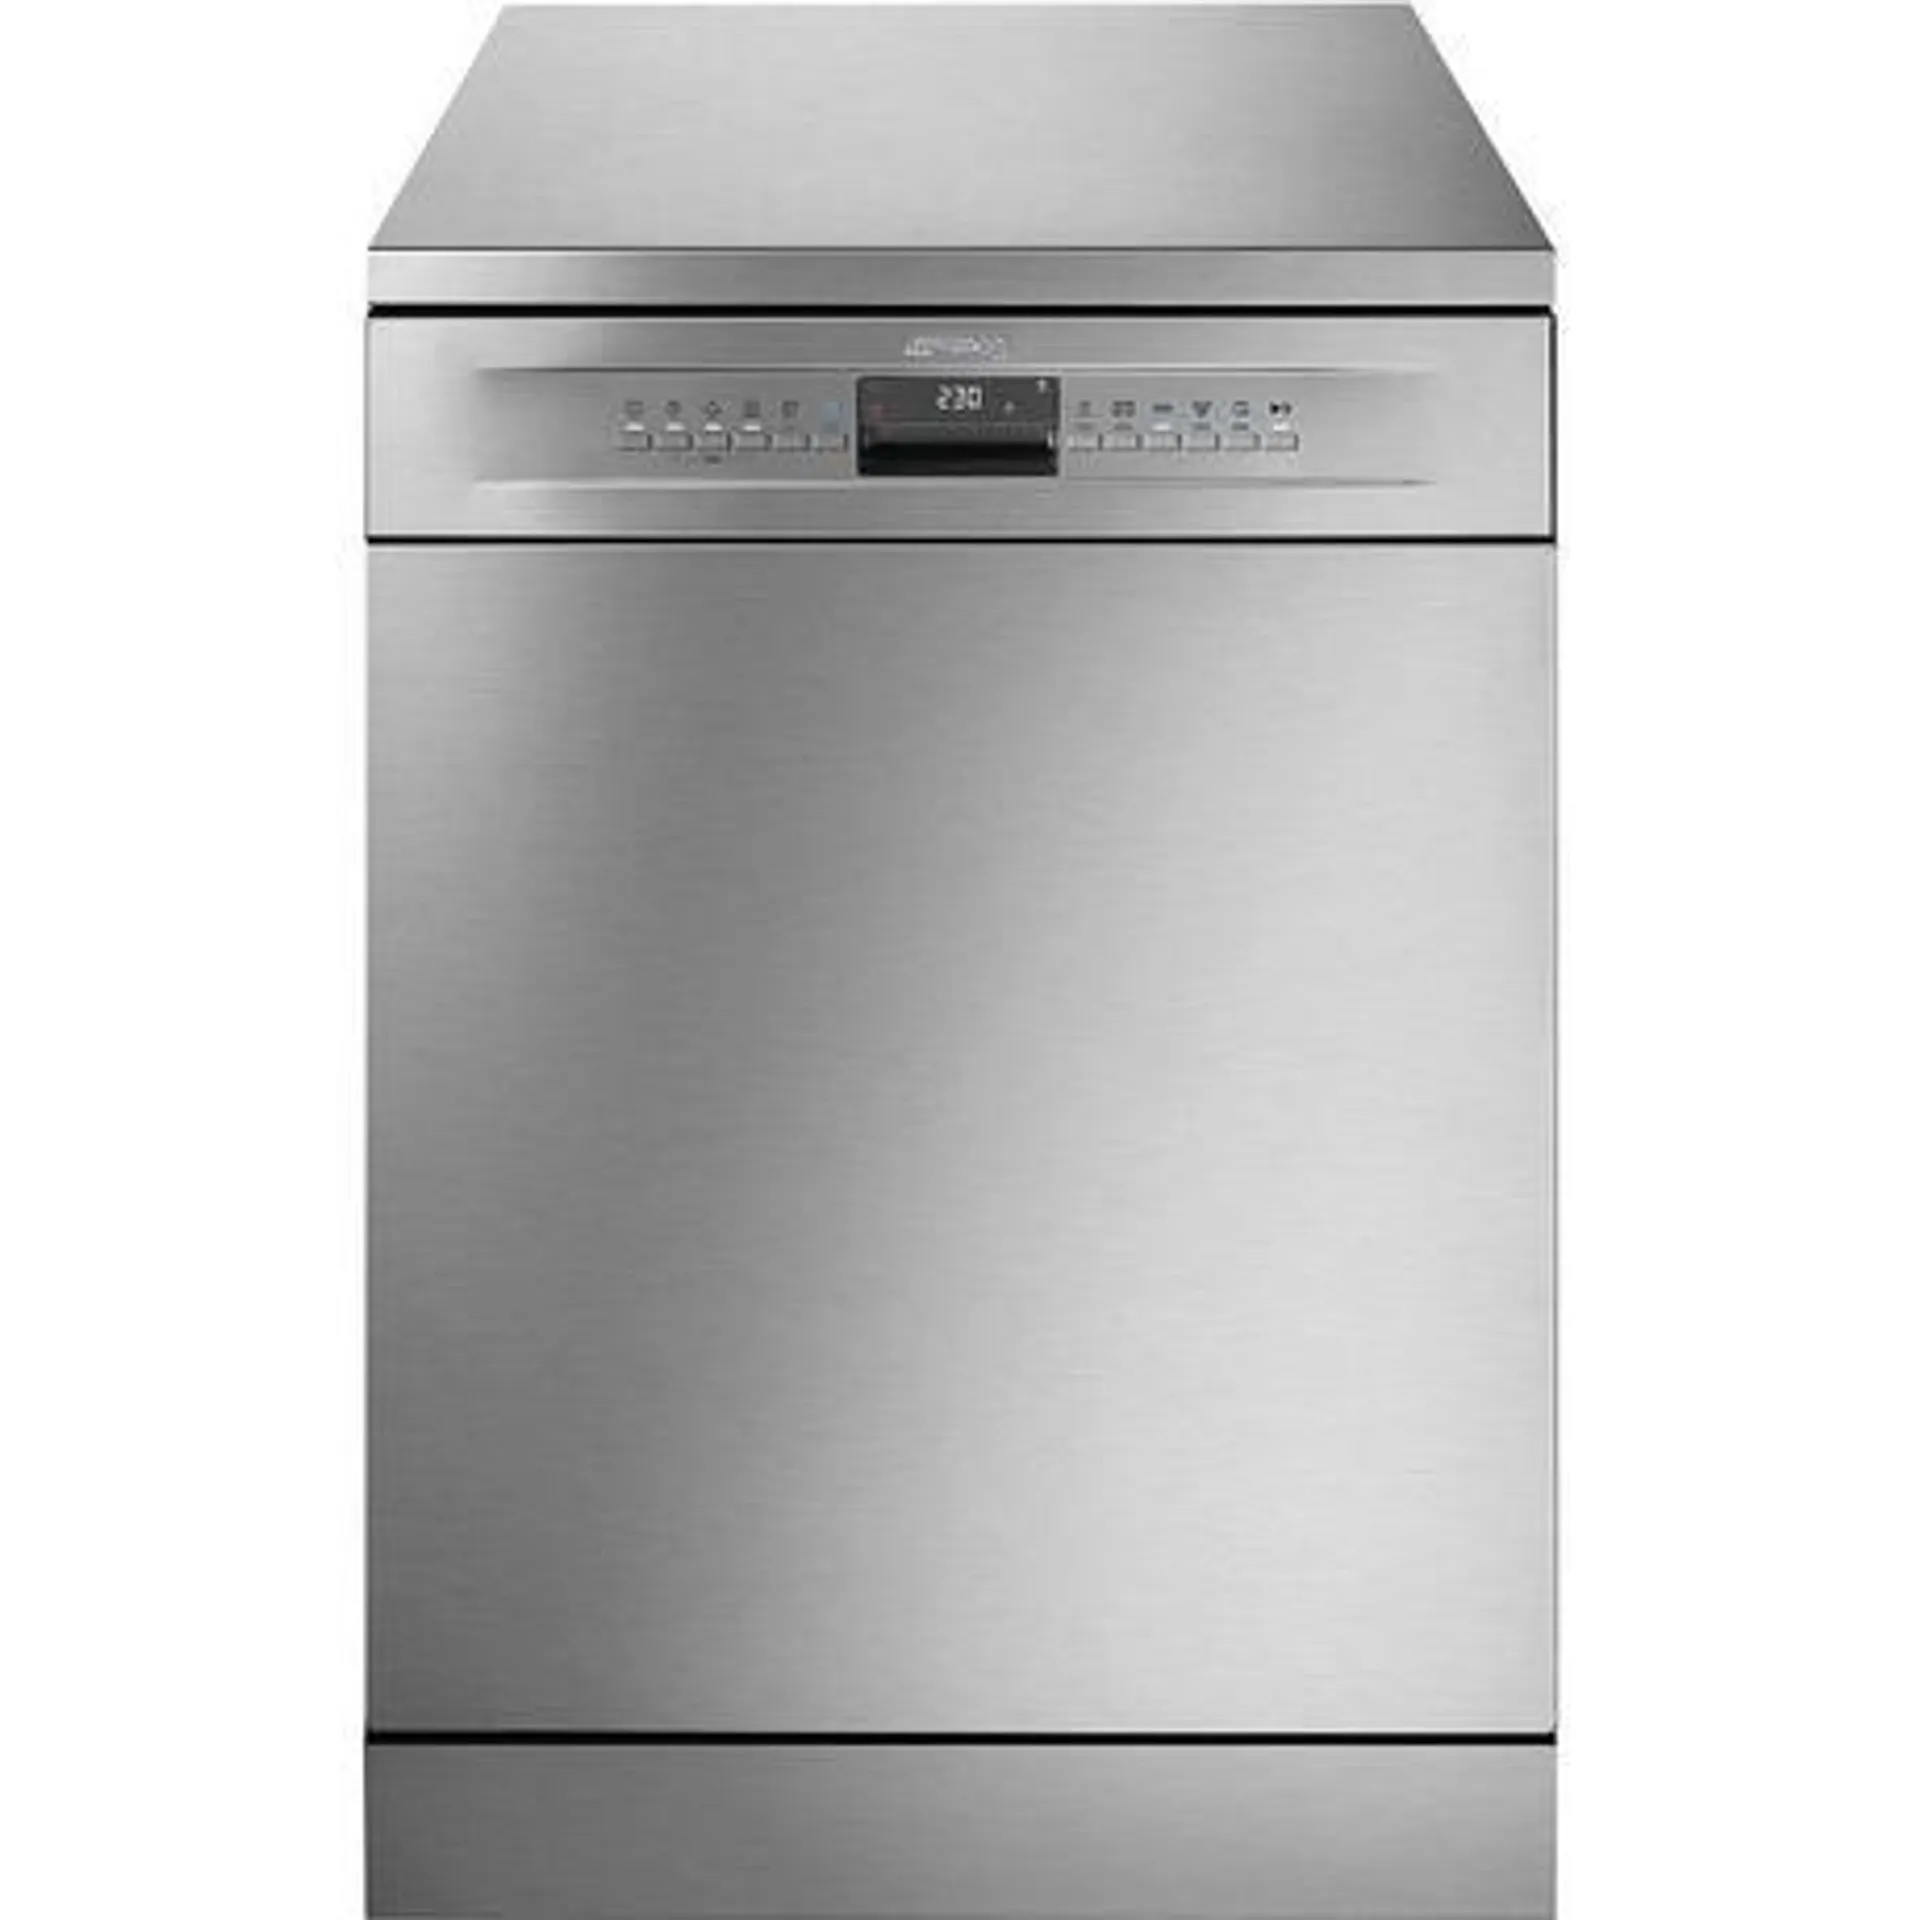 Smeg DF344BX Dishwasher - Stainless Steel - 13 Place Settings